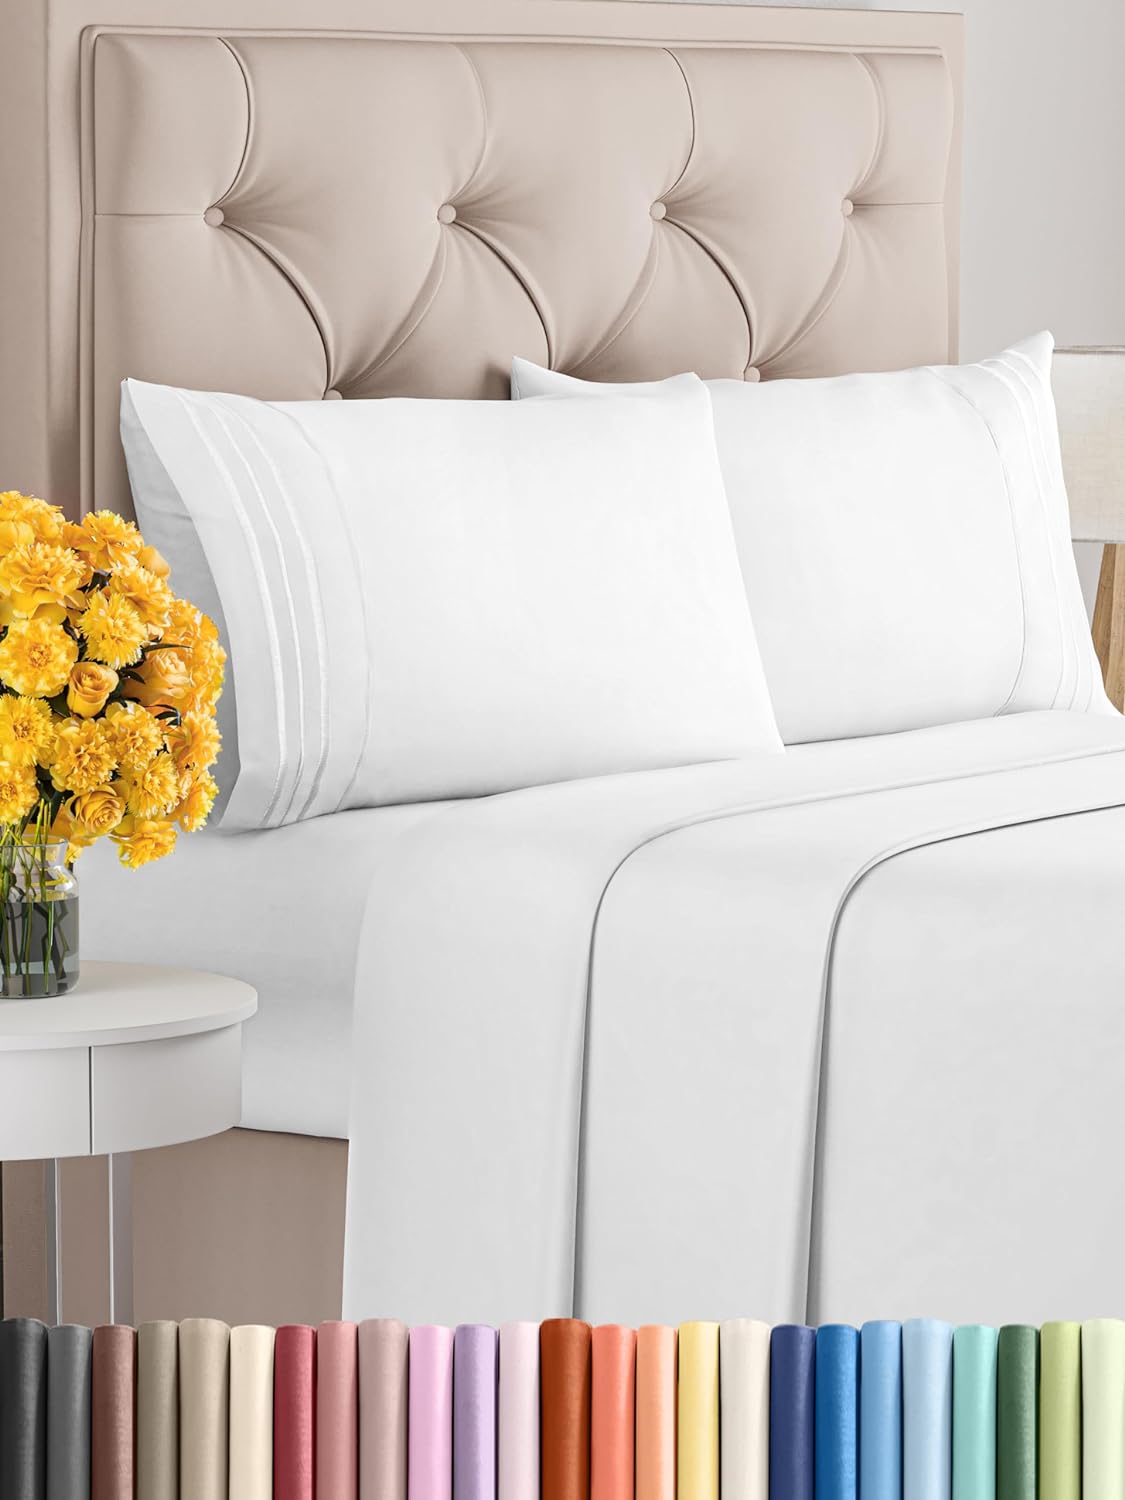 Queen Sheet Set Cooling & Wrinkle-Free